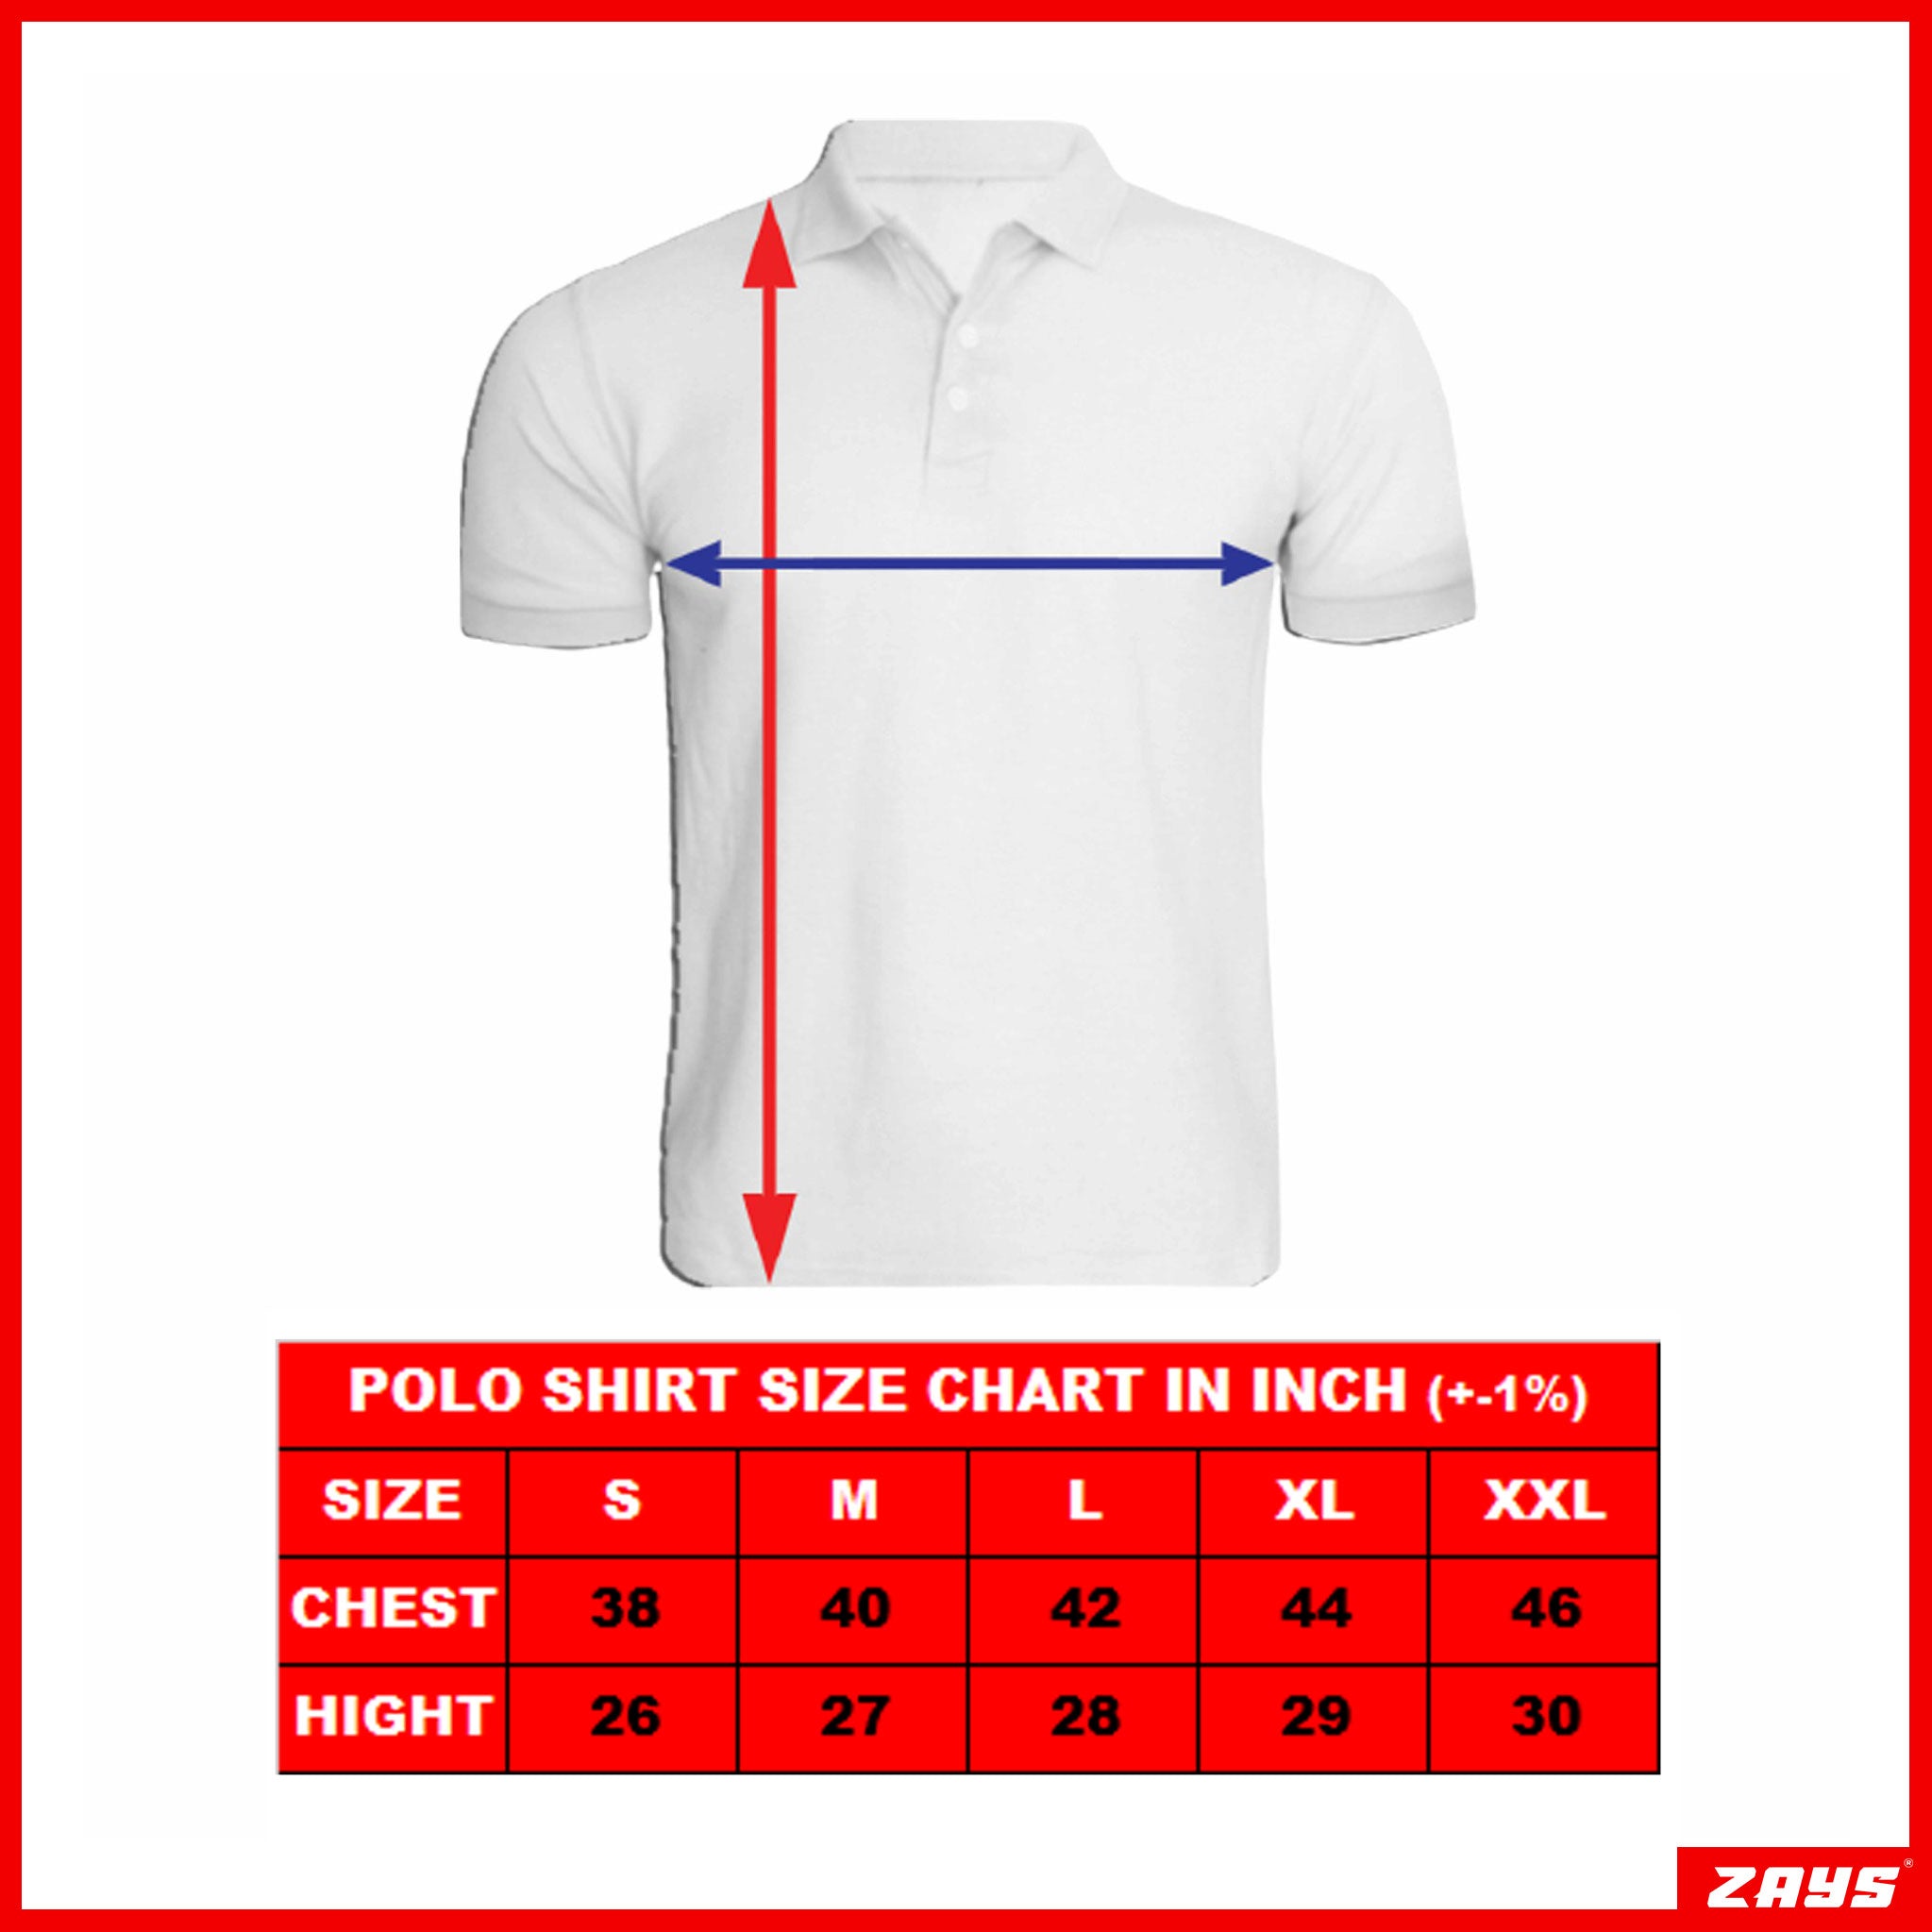 Imported Super Premium Cotton Polo Shirt For Men (ZAYSIPS35) - Light Red